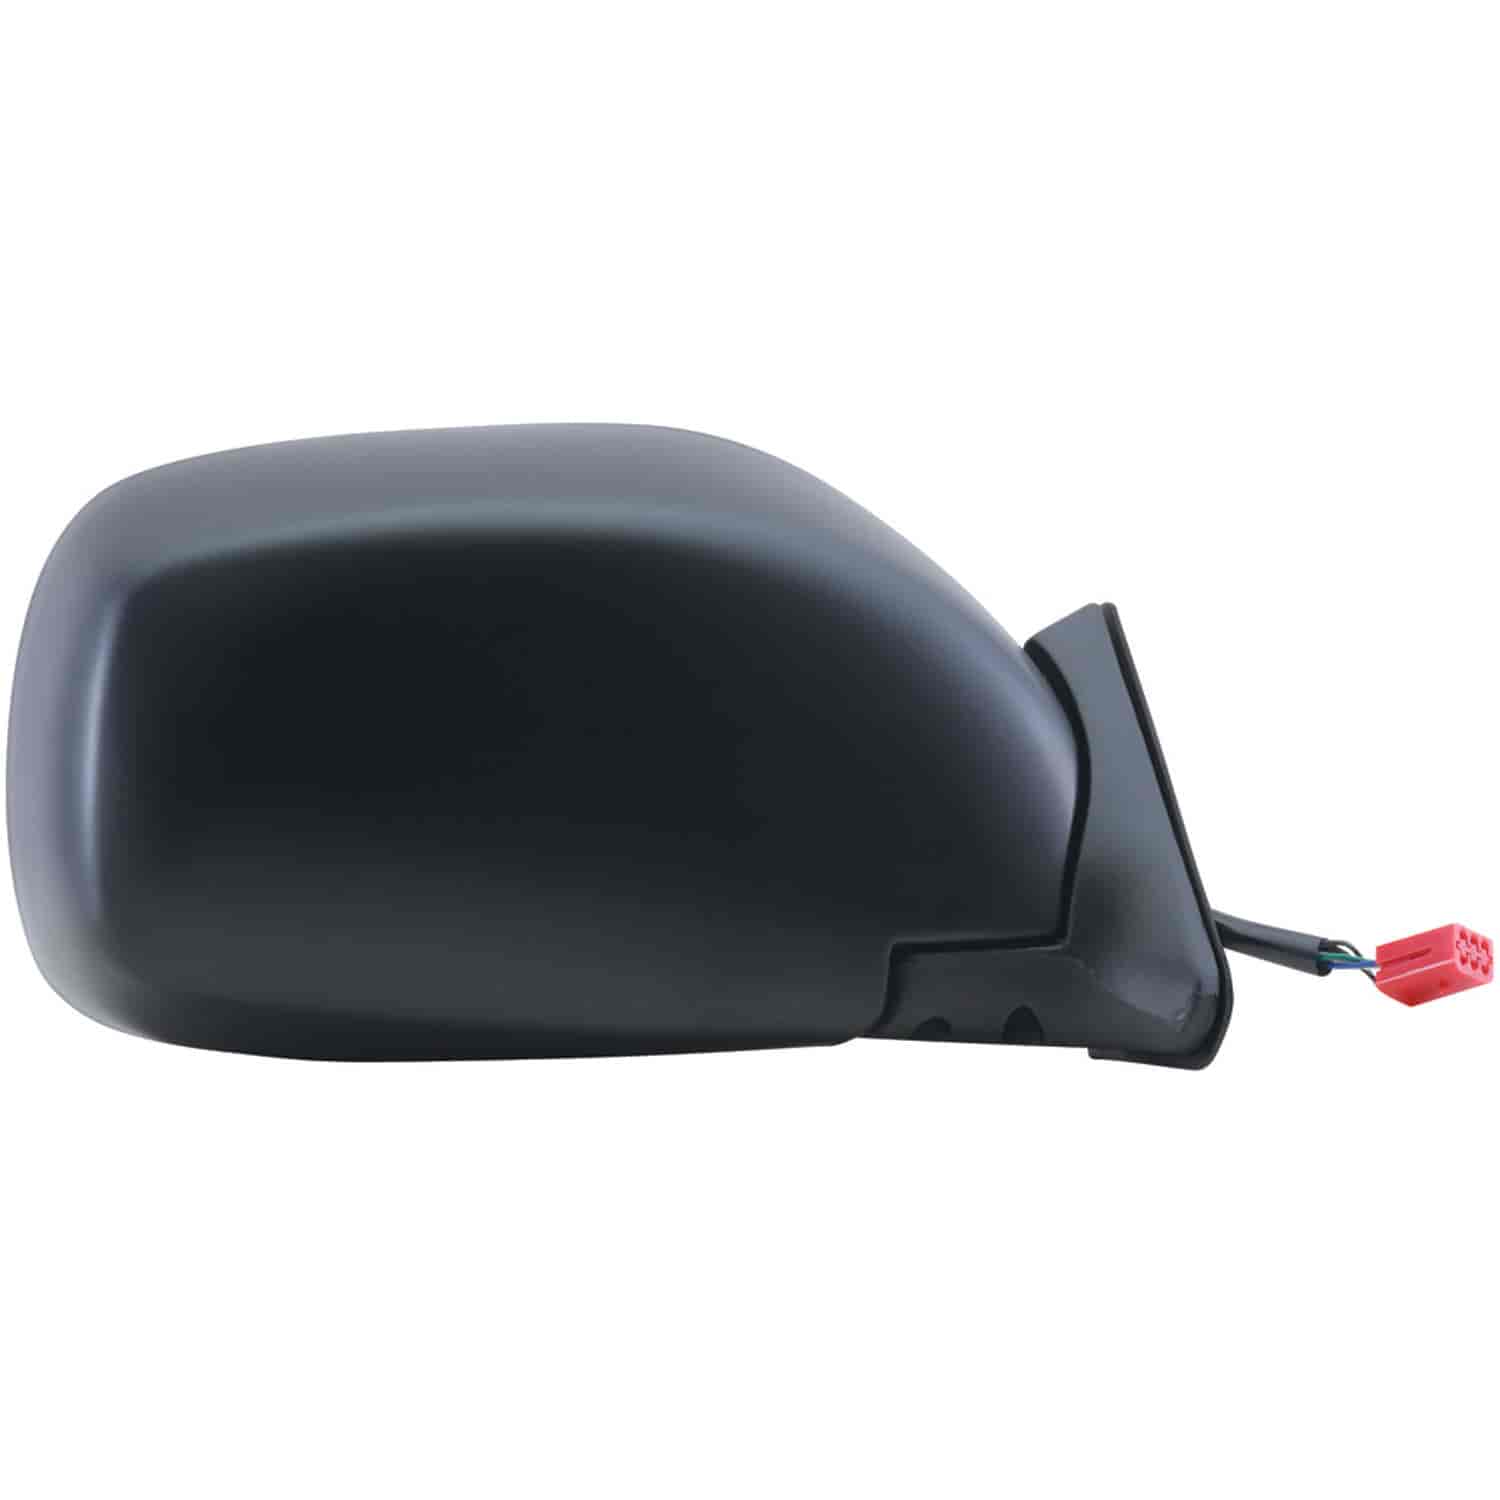 OEM Style Replacement mirror for 97-01 JEEP Cherokee passenger side mirror tested to fit and functio